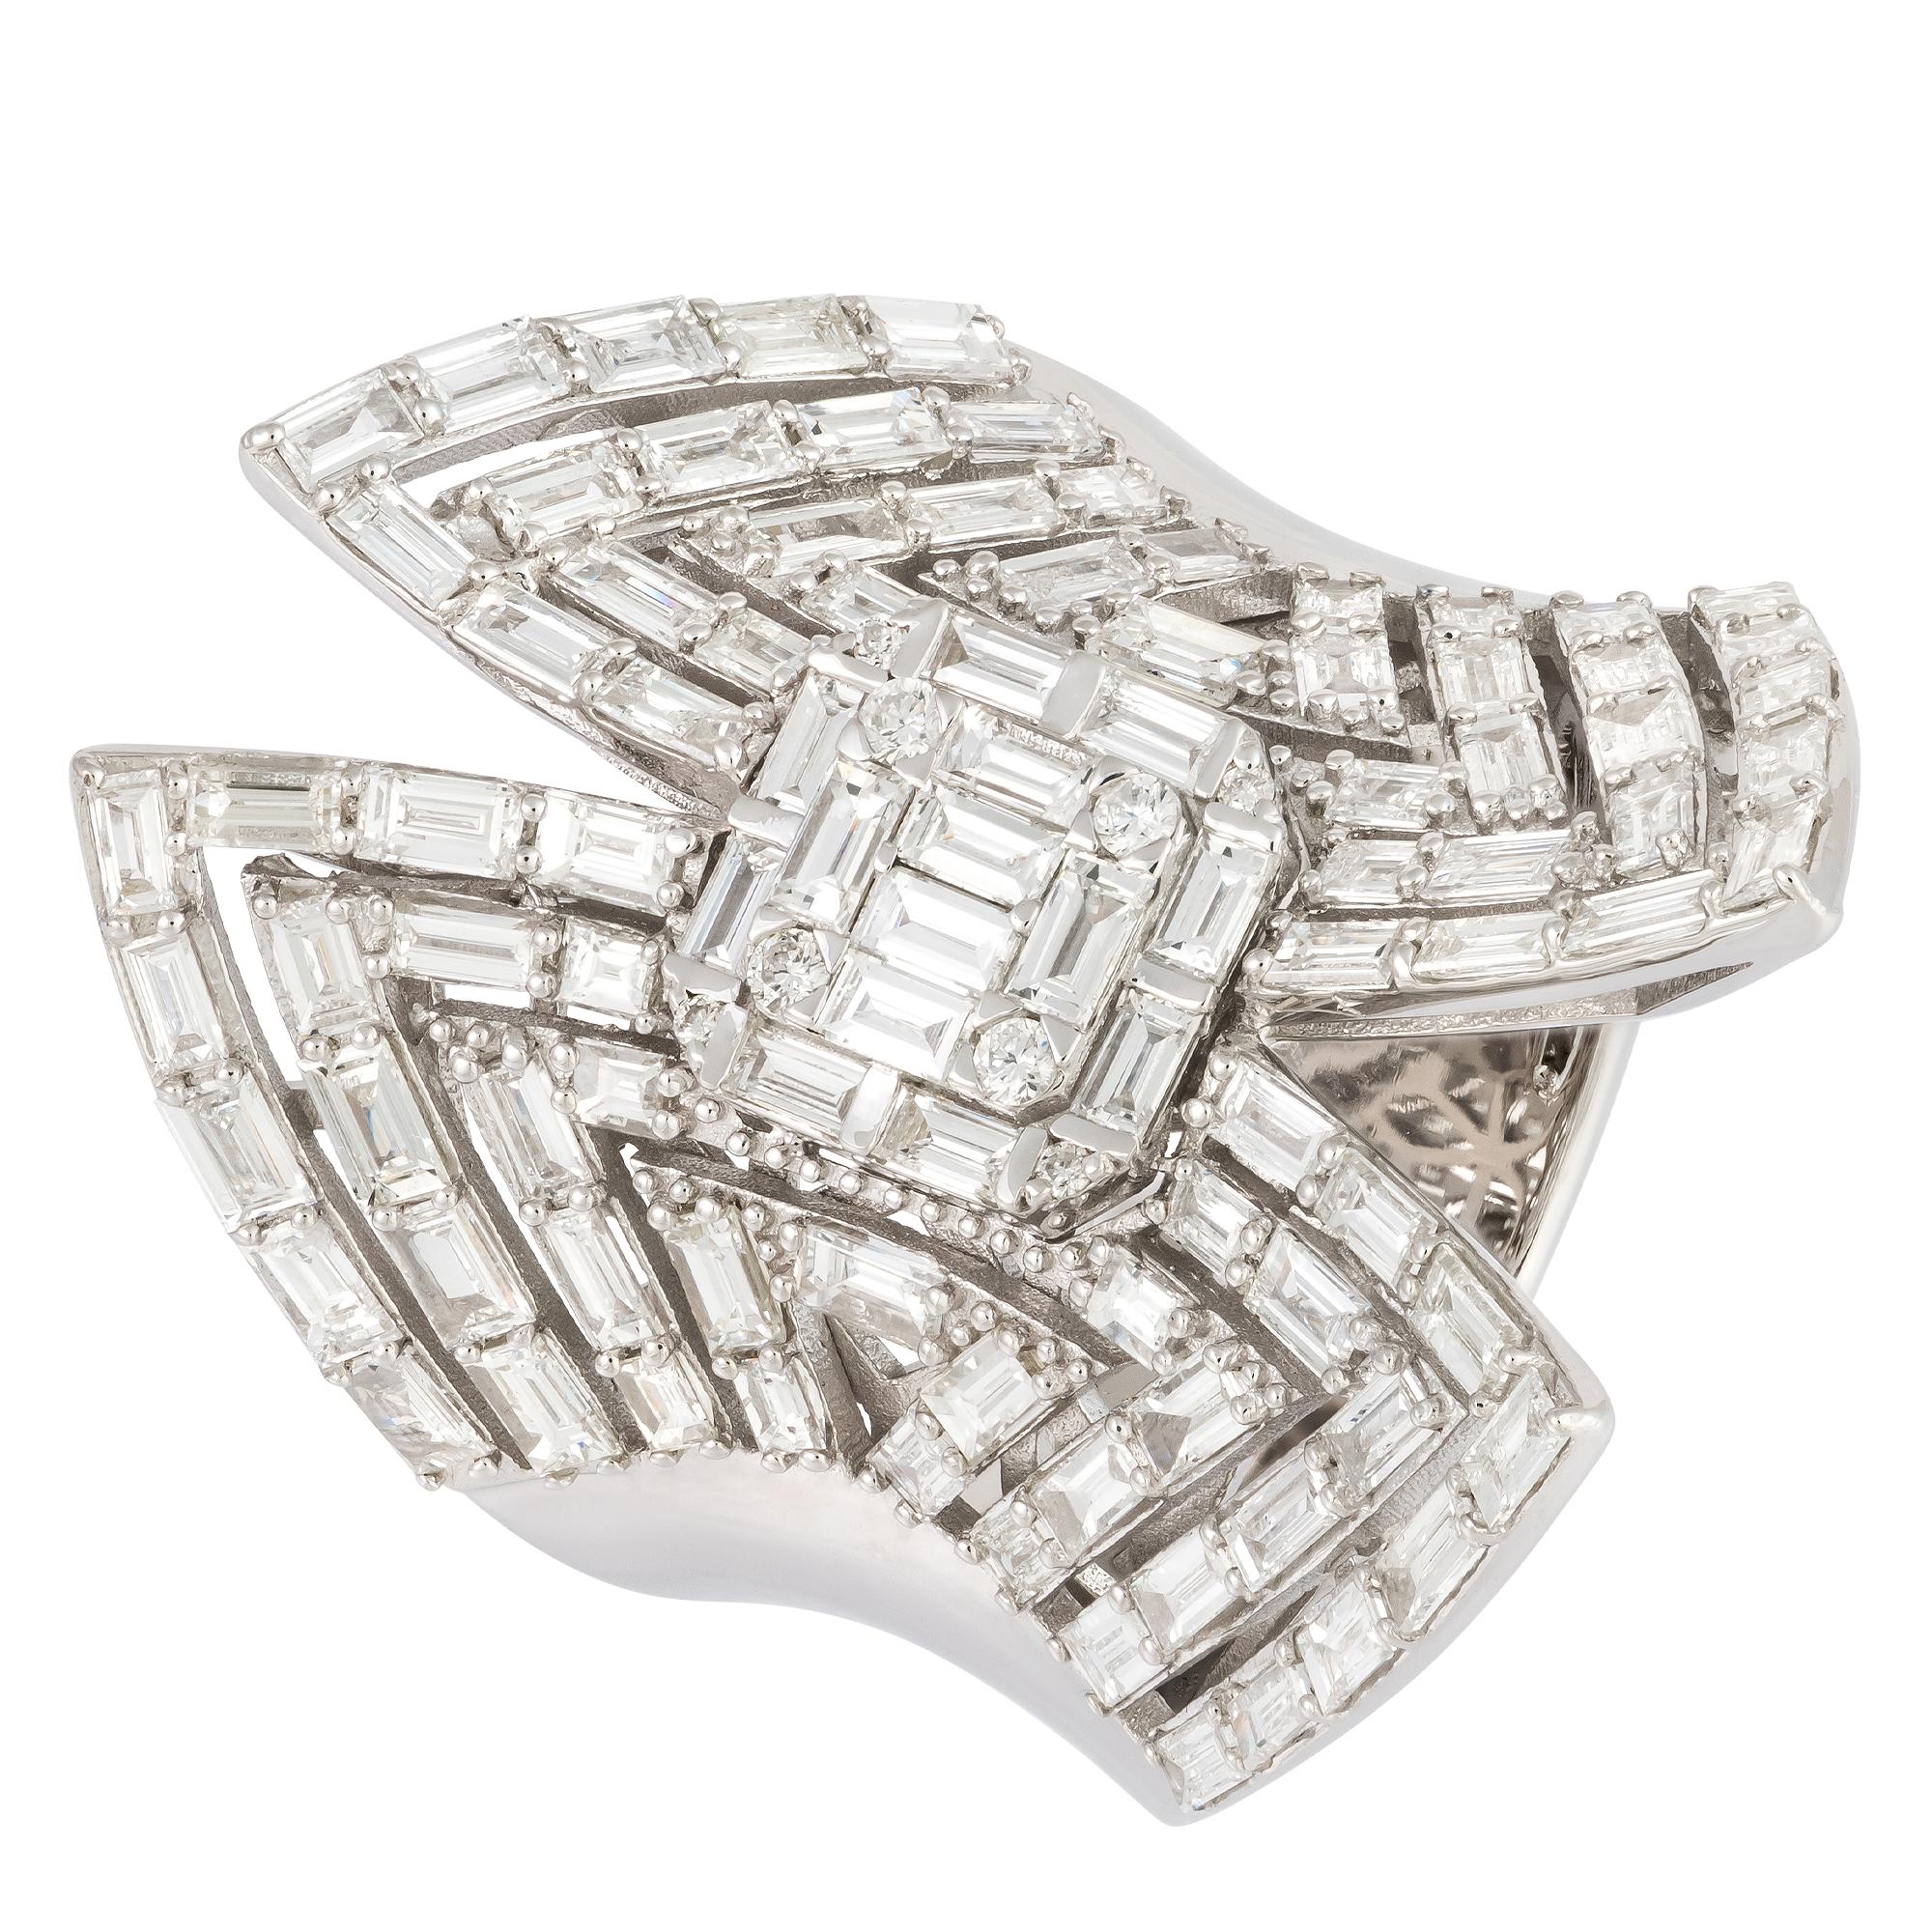 For Sale:  Statement  White 18K Gold White Diamond Ring For Her 4